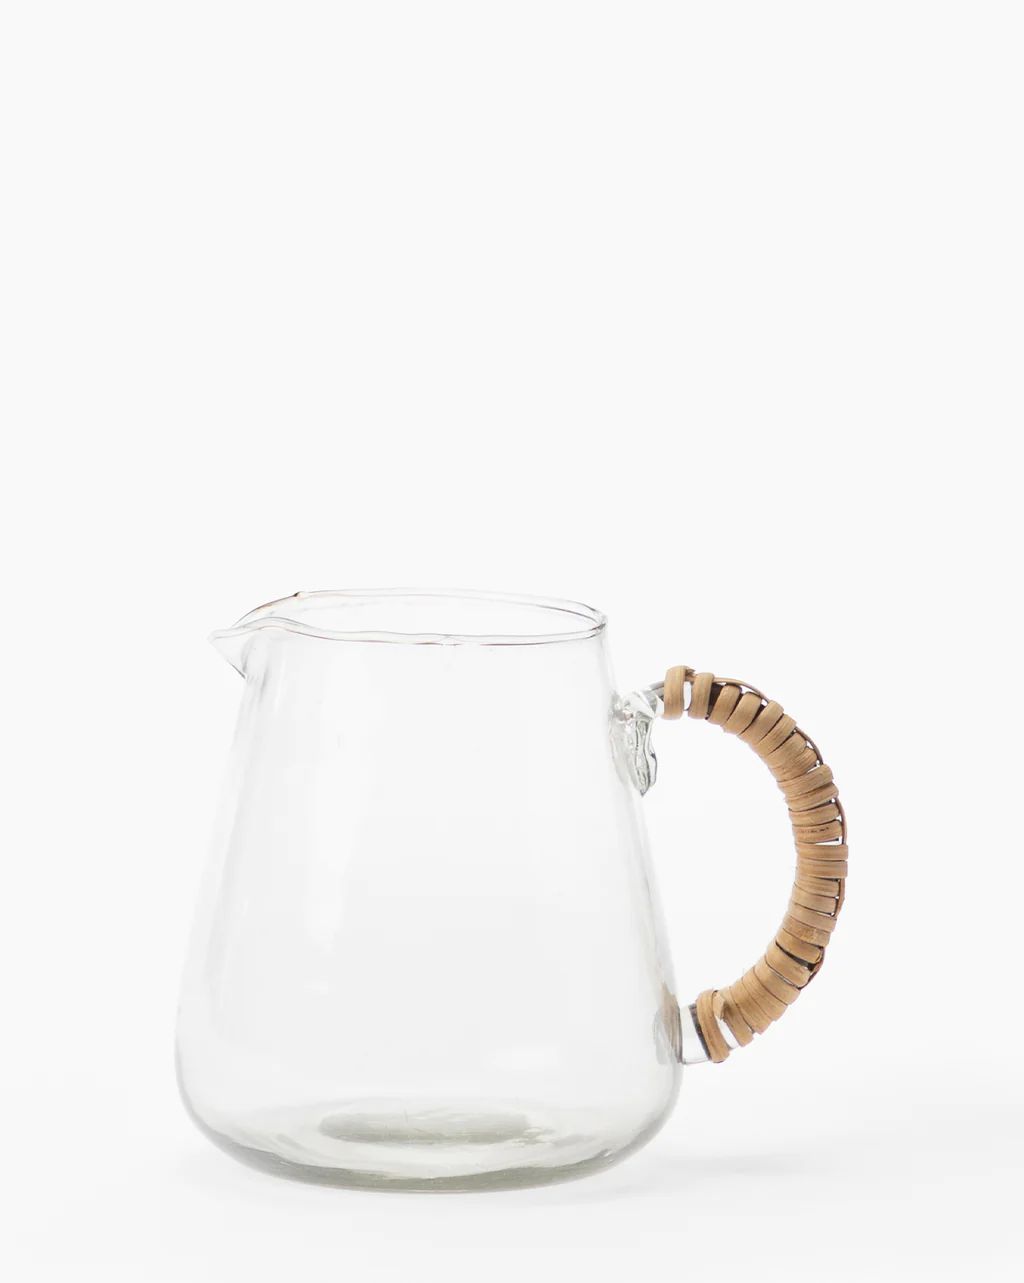 Wicker Handled Glass Pitcher | McGee & Co.